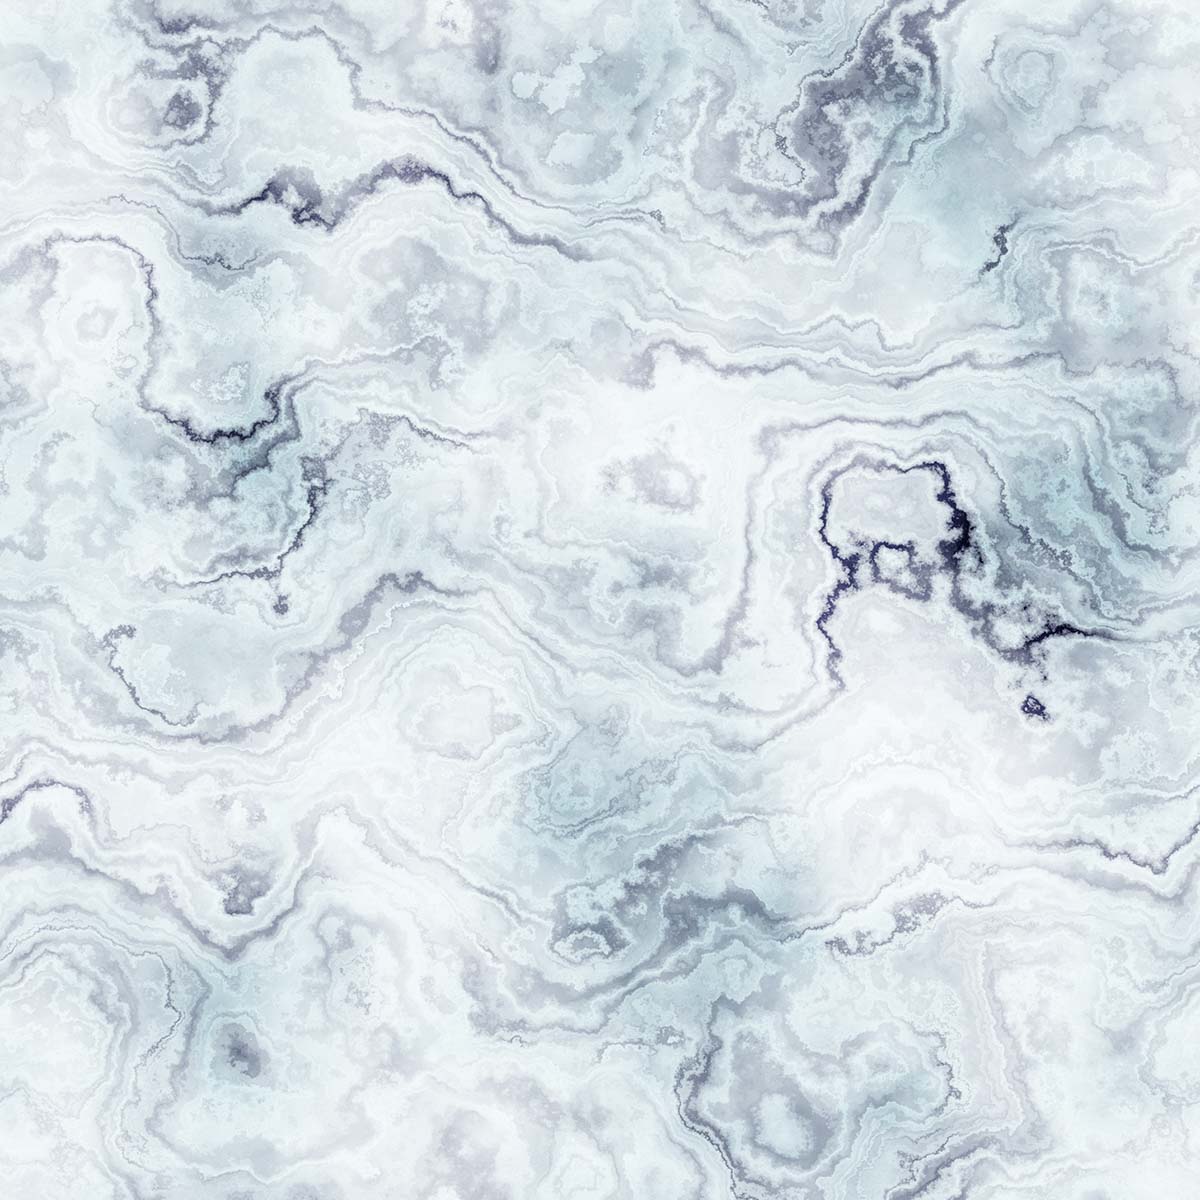 A close up of a marbled surface